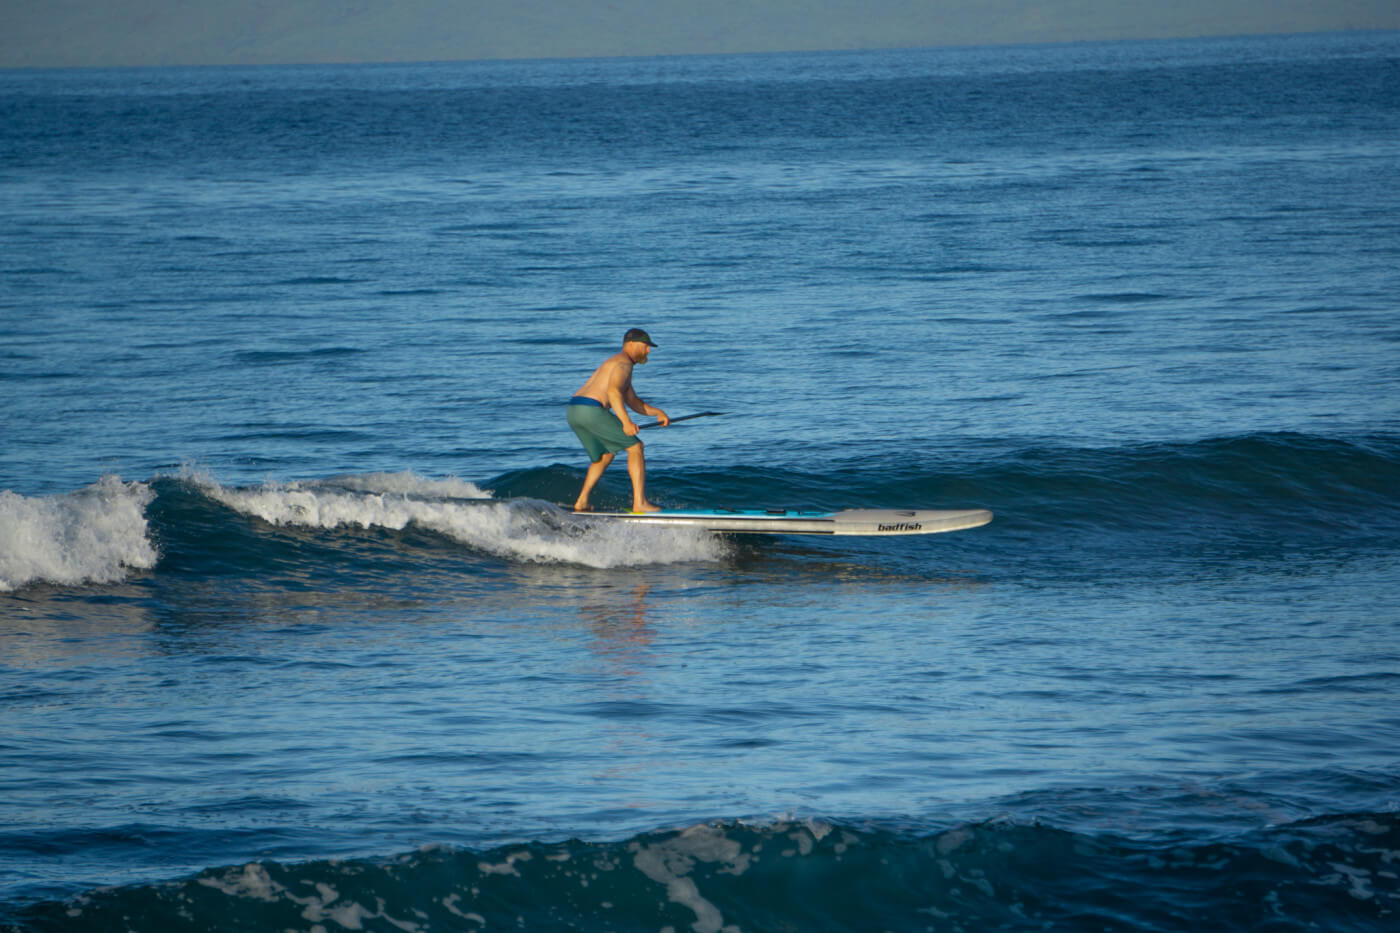 Surfing small waves on the iSHAPE is greatly enhanced with the Wiki Rail Tail.